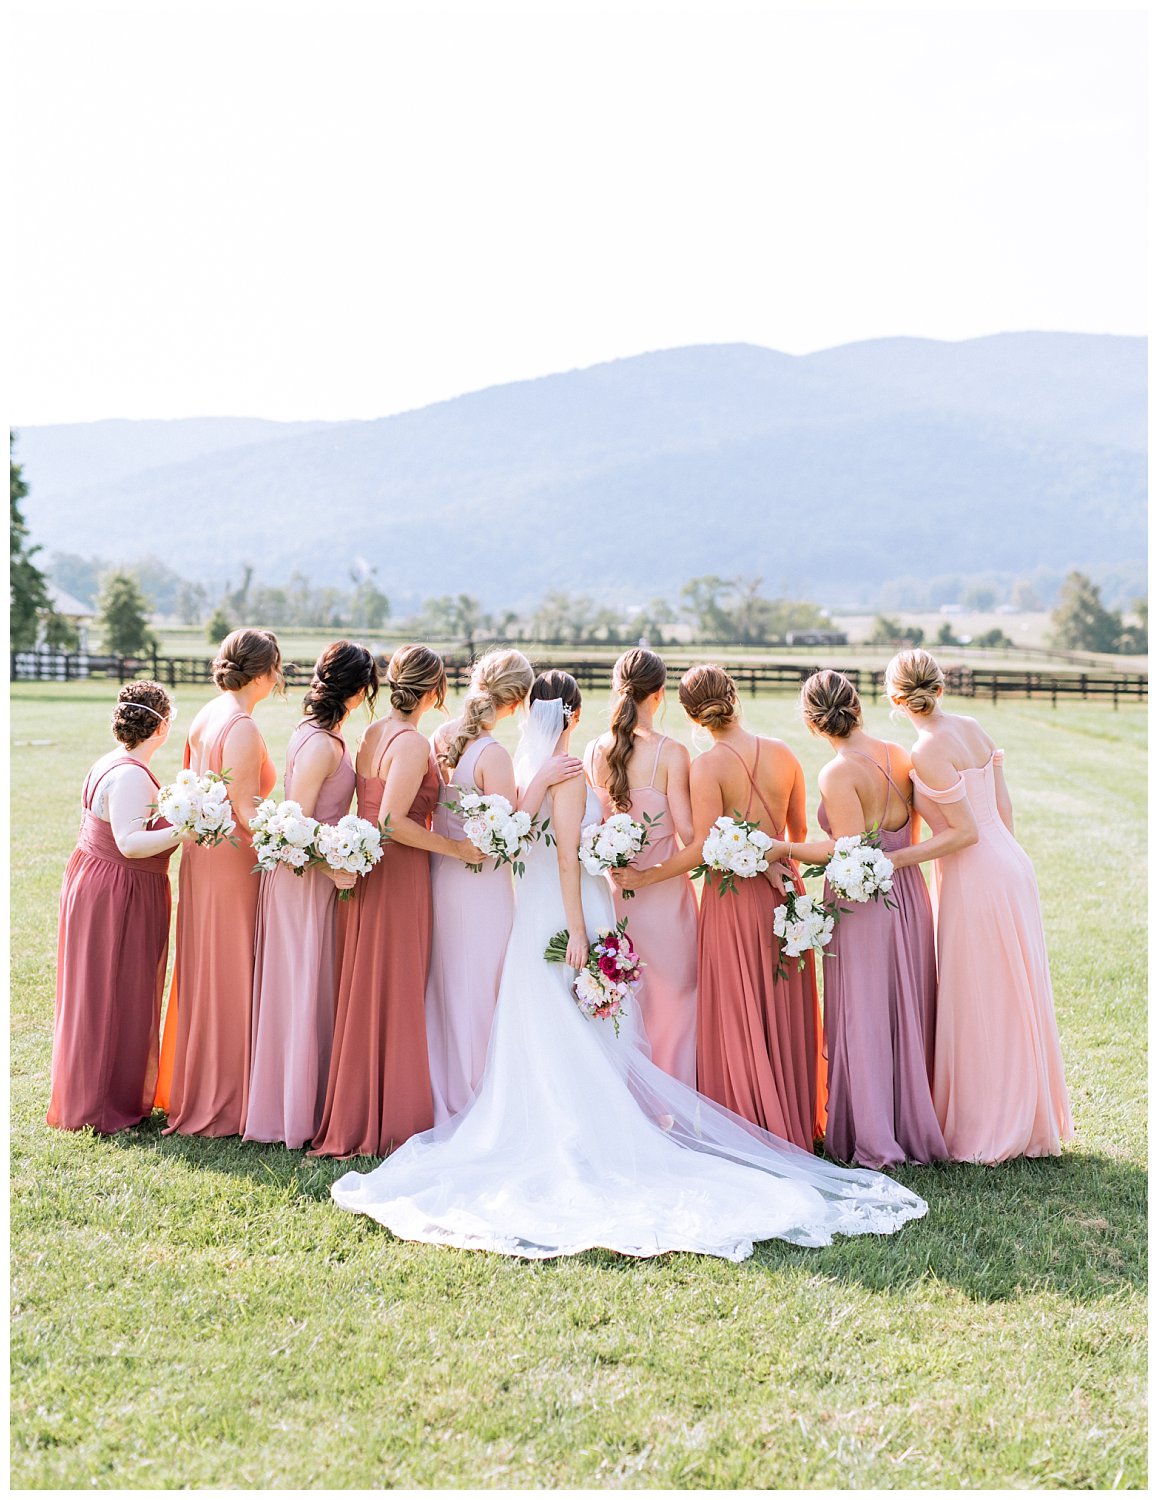 Portraits of the bride with her bridesmaids at her King Family Vineyard wedding